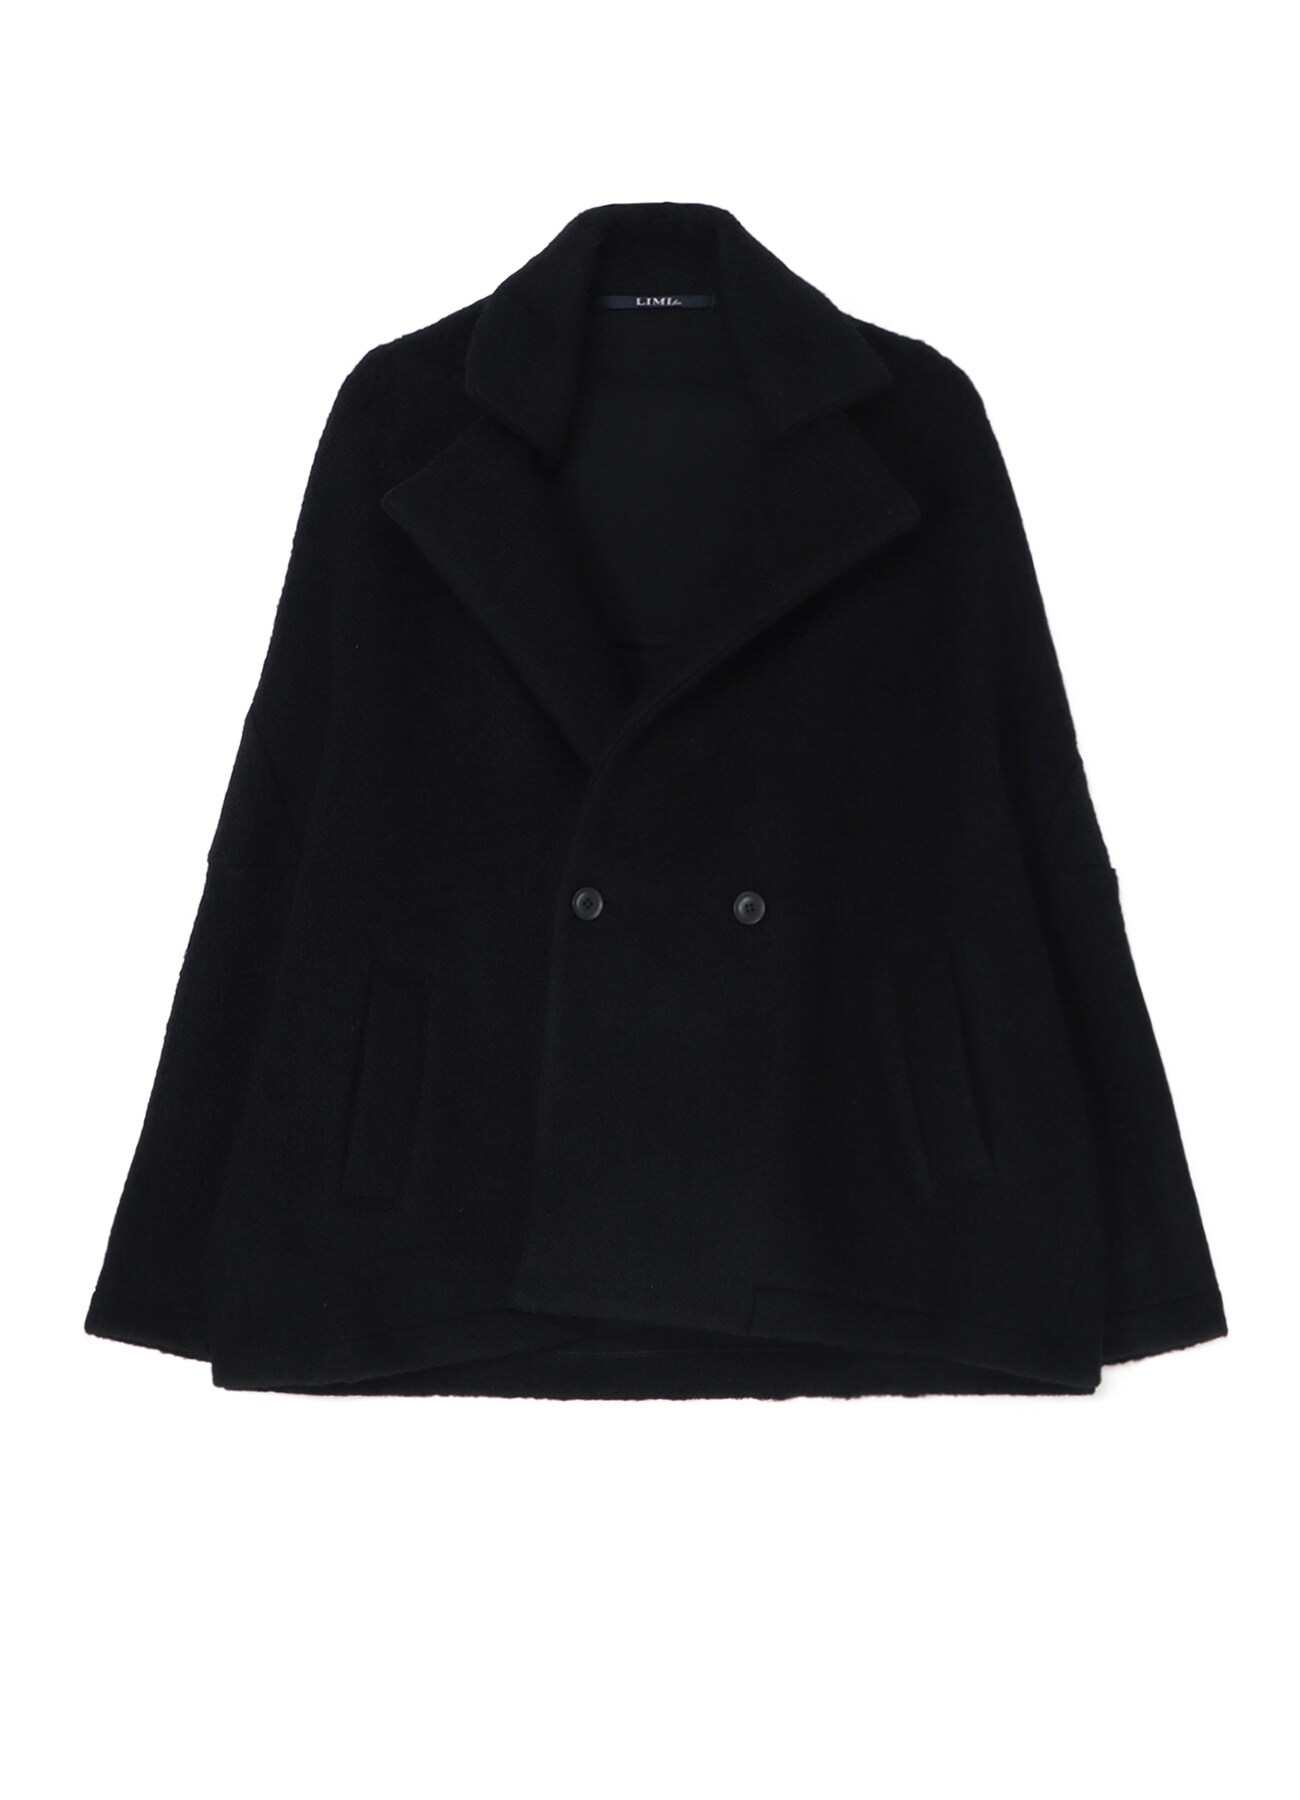 SHEEP PILE JACKET WITH DOUBLE FRONT BUTTON(S Charcoal): LIMI feu ...